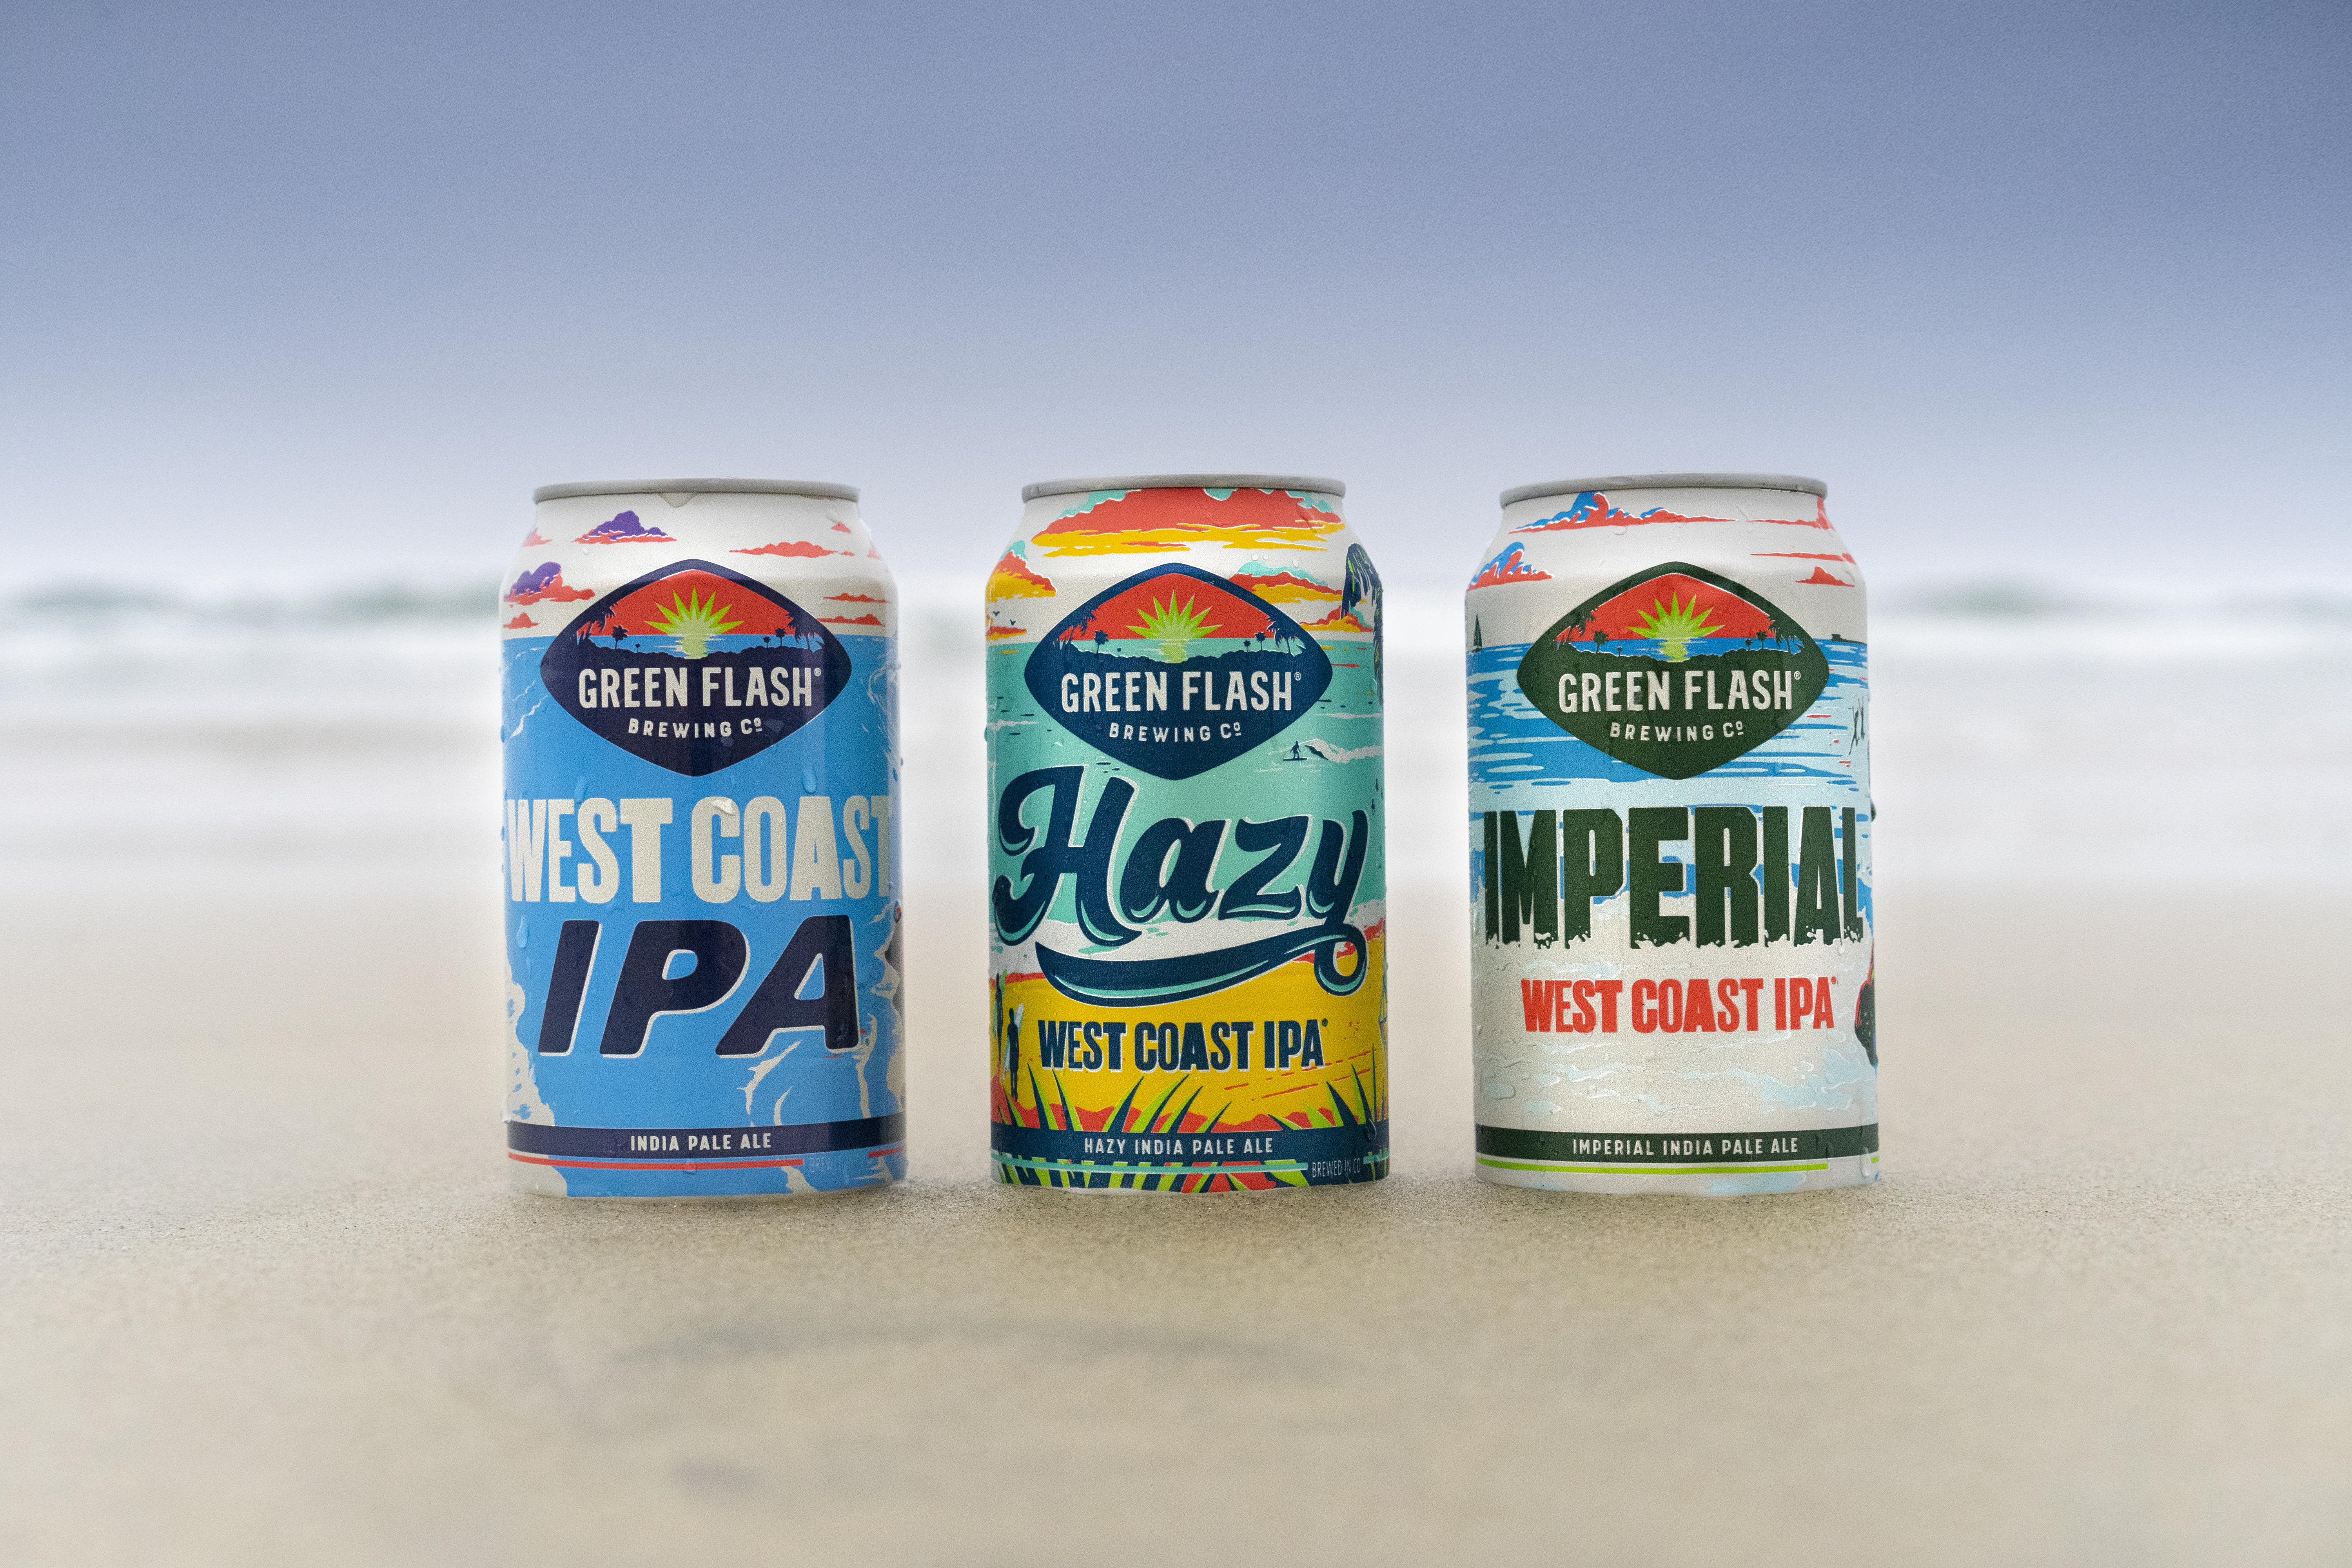 Featured: The brand’s iconic WEST COAST IPA® beer and the two new IPA beers including Imperial West Coast IPA and Hazy West Coast IPA. Photos by Aaron Grossman, Creative and Brand Director at Green Flash and Shae Balzer, SweetWater Brew's Social Media Marketing Manager.